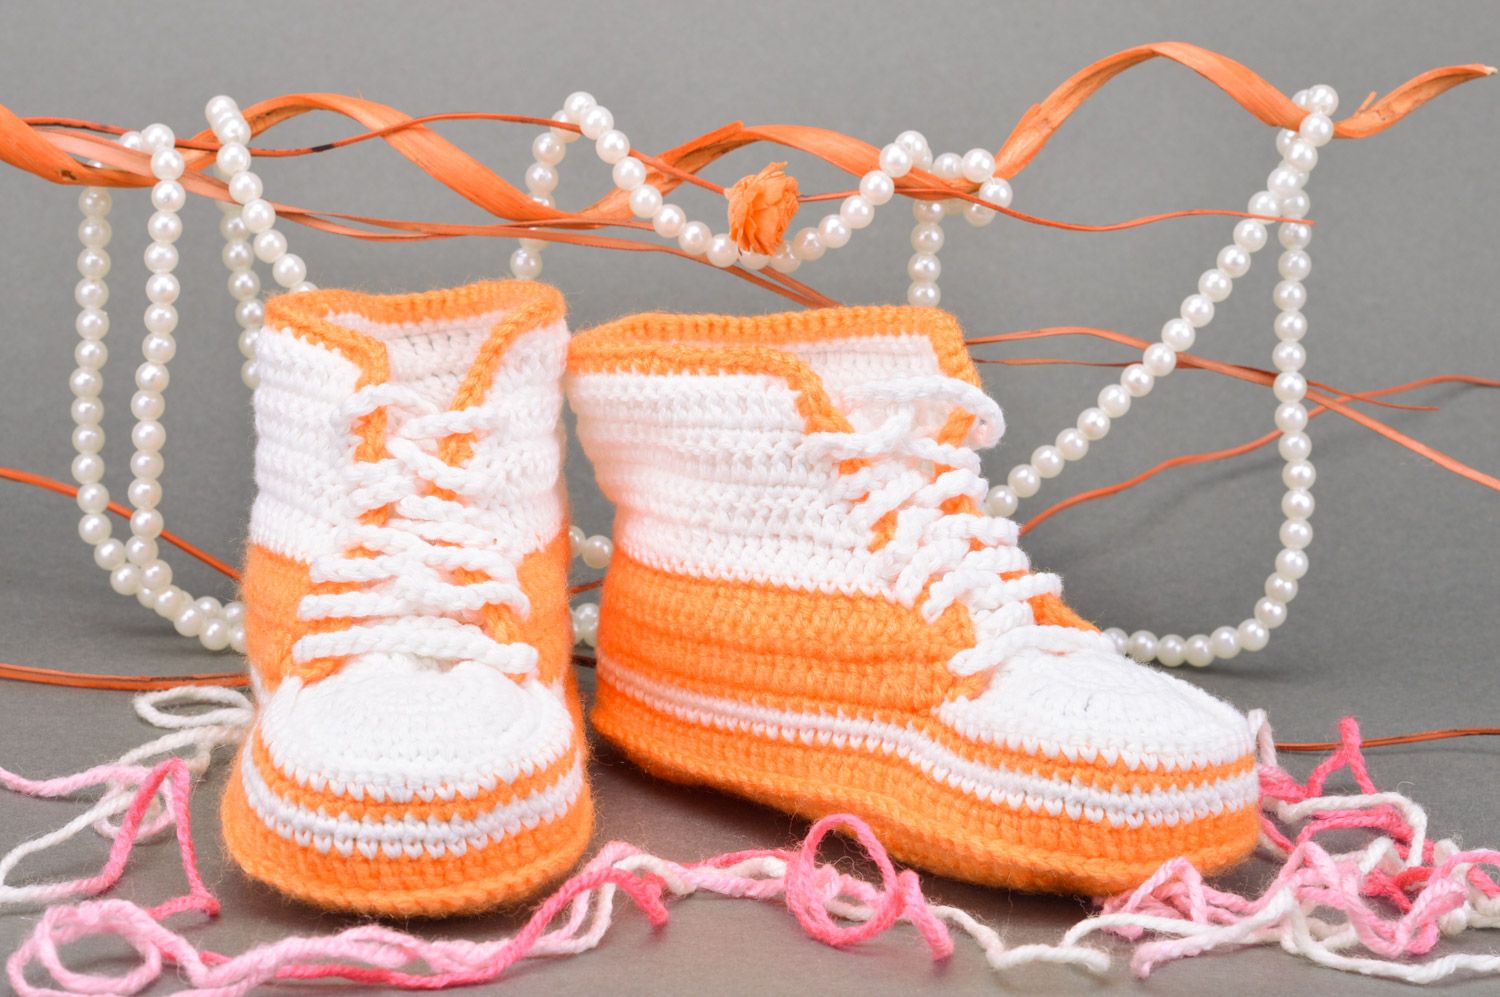 Handmade crocheted small orange and white baby shoes with shoelaces photo 1